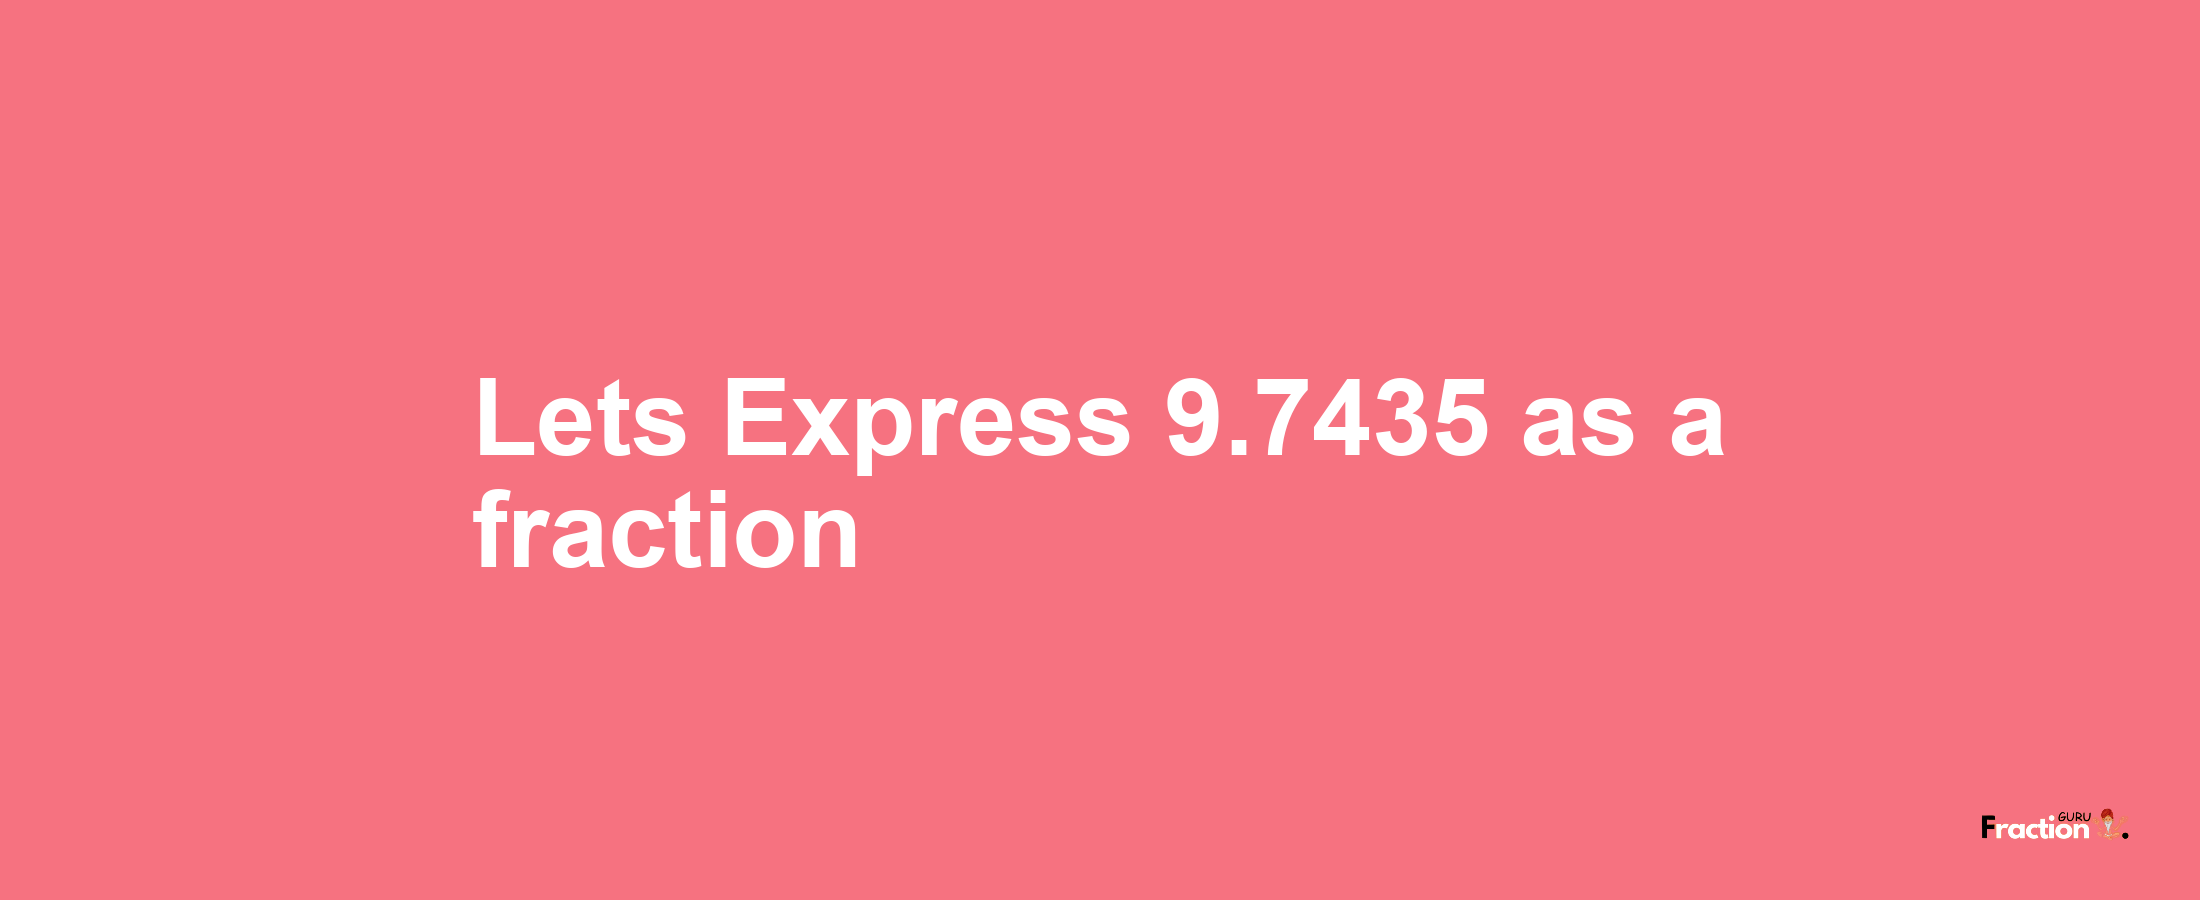 Lets Express 9.7435 as afraction